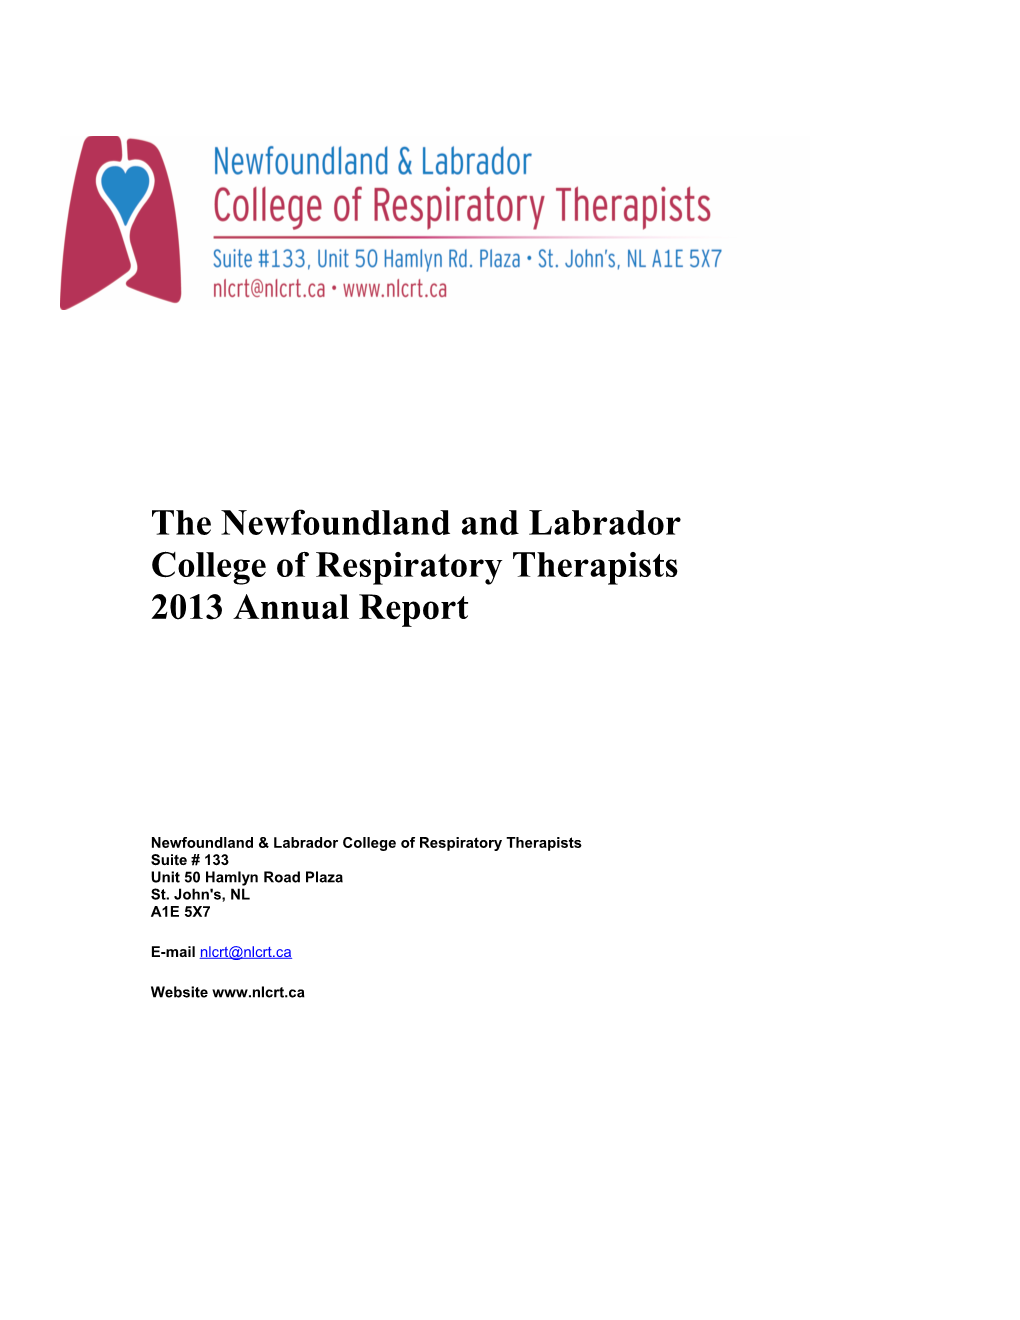 The Newfoundland and Labrador College of Respiratory Therapists